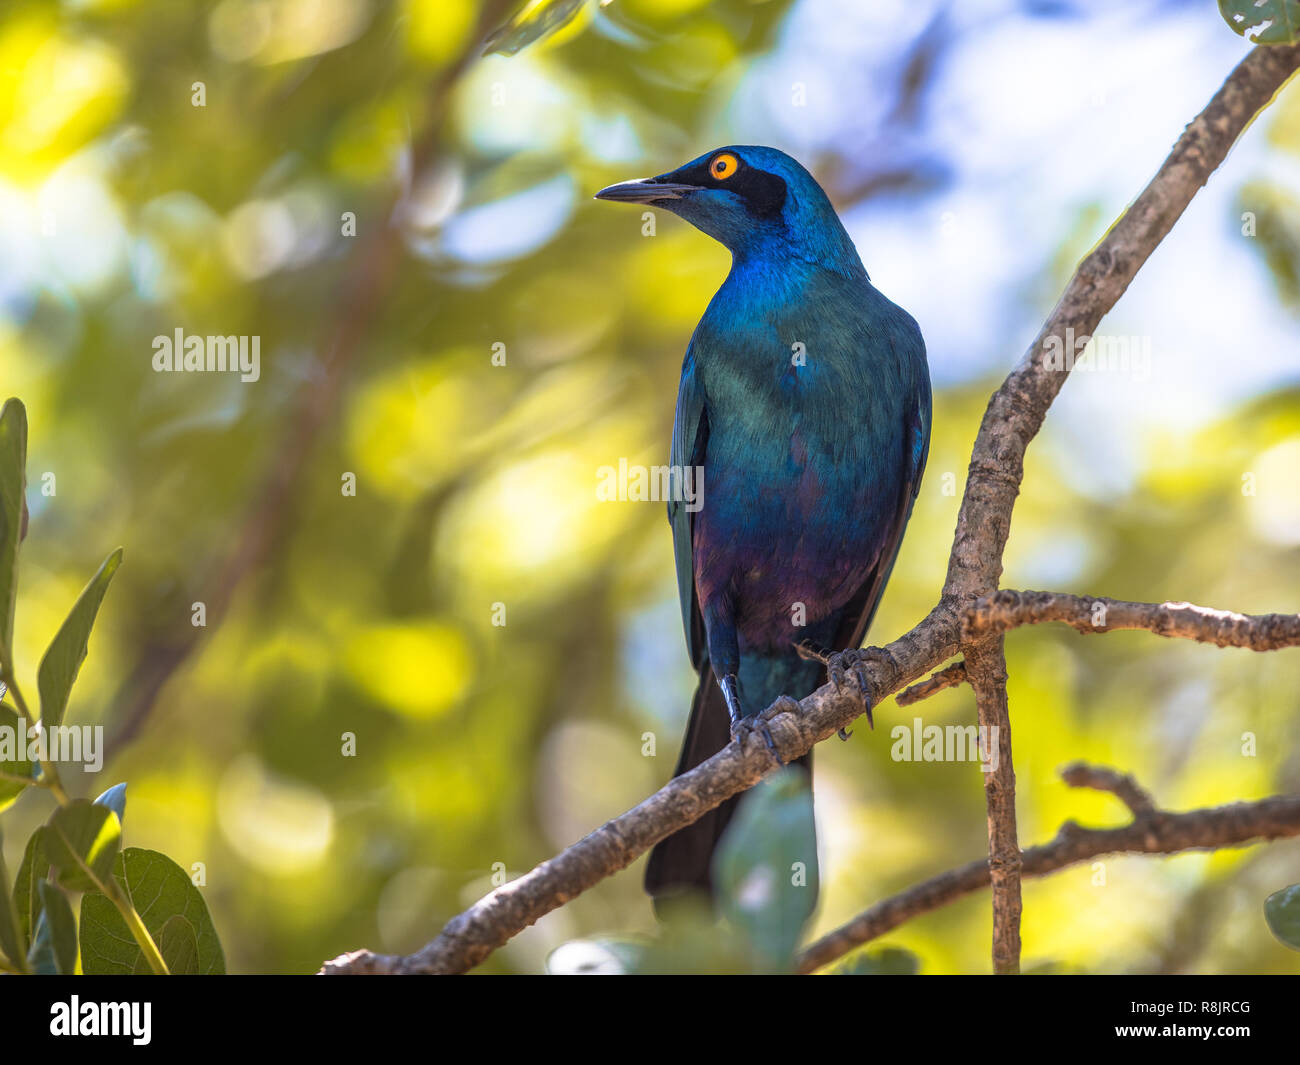 Greater blue-eared Starling (Lamprotornis chalybaeus) bird perched in shade of tree in Kruger national park South Africa Stock Photo